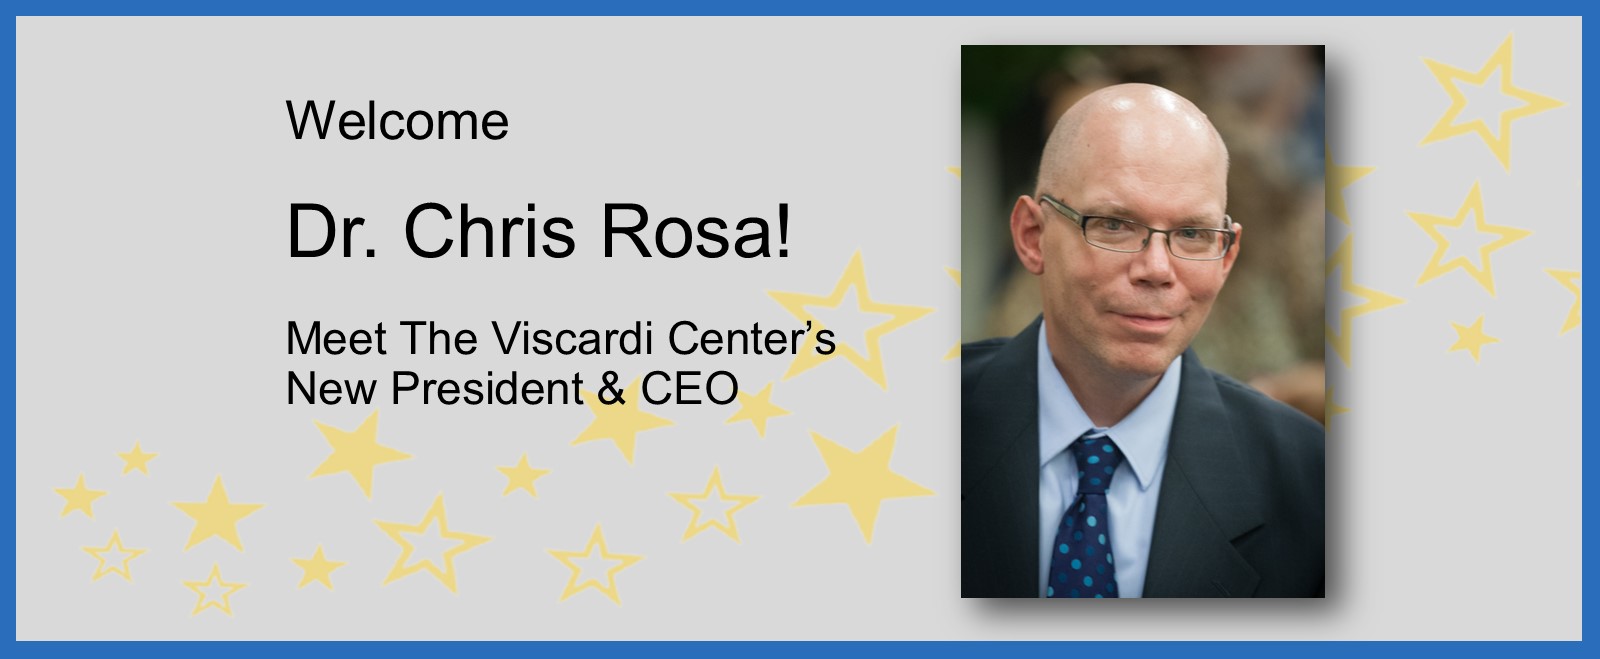 Welcome Dr. Chris Rosa! Meet Viscardi's new President & CEO.